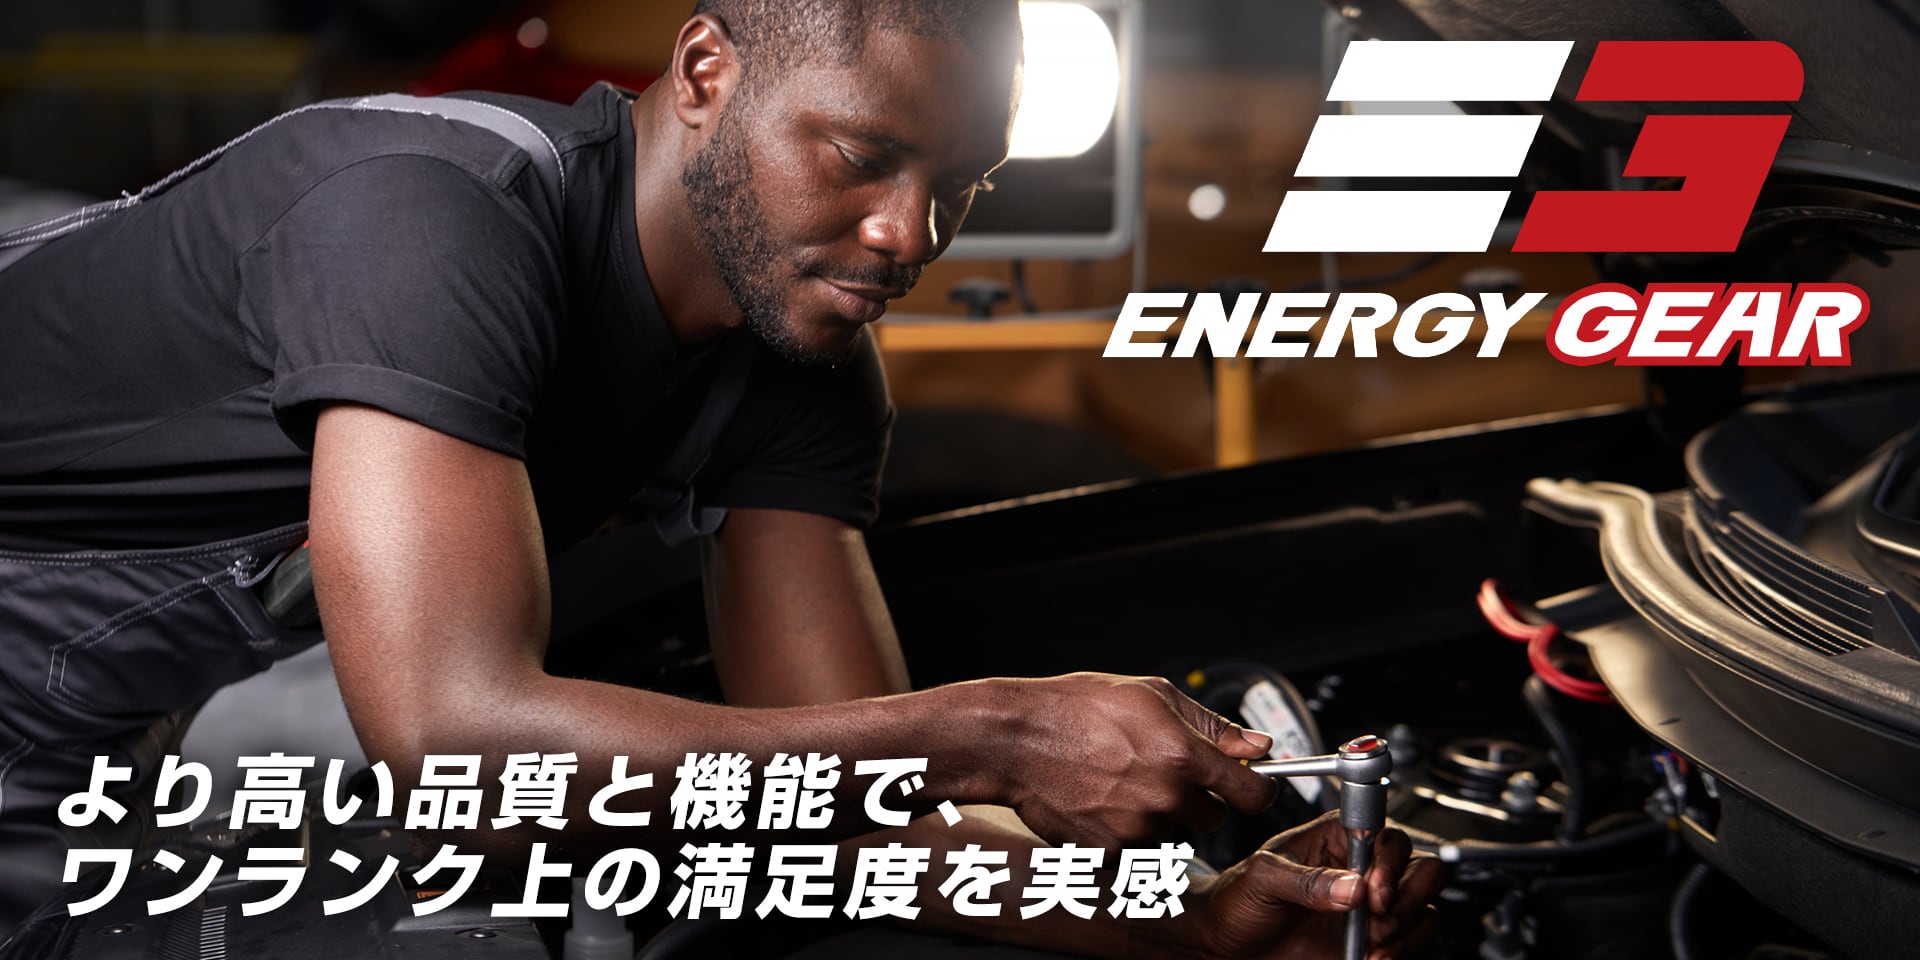 ENERGY GEAR（エナギーギア）